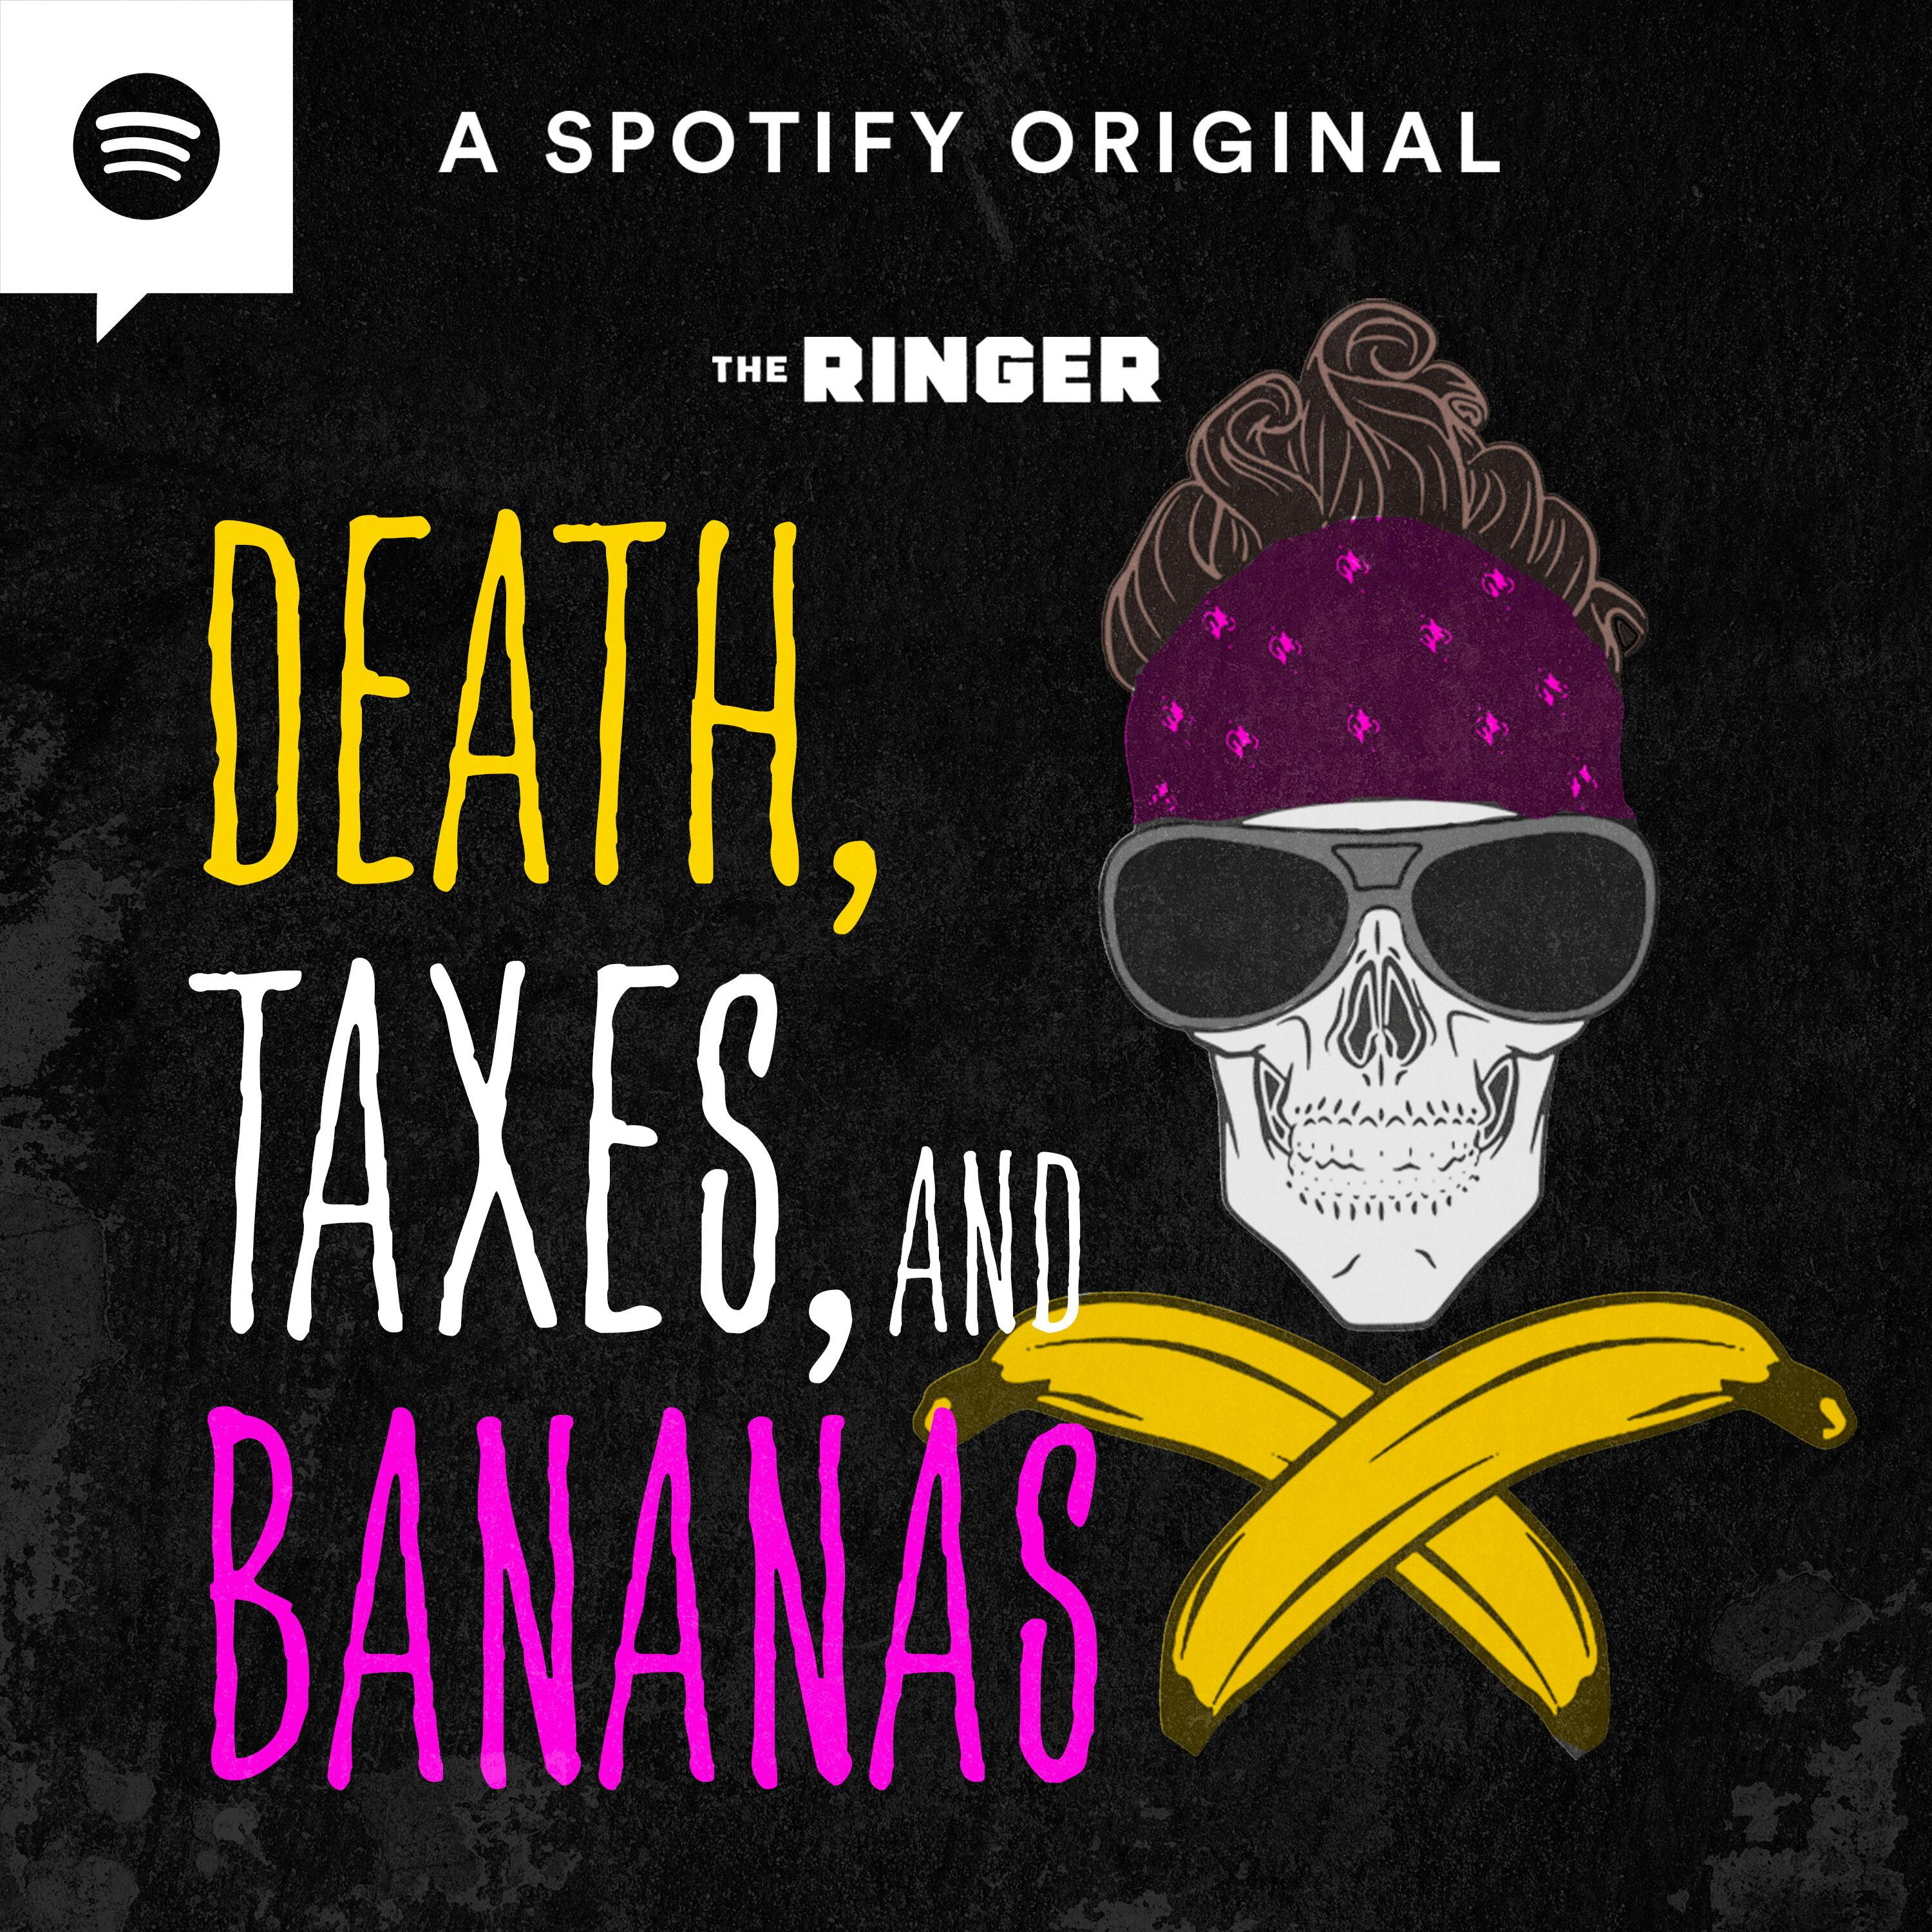 ‘House of Villains’ Episodes 8-9 With Bobby Lytes | Death, Taxes, and Bananas